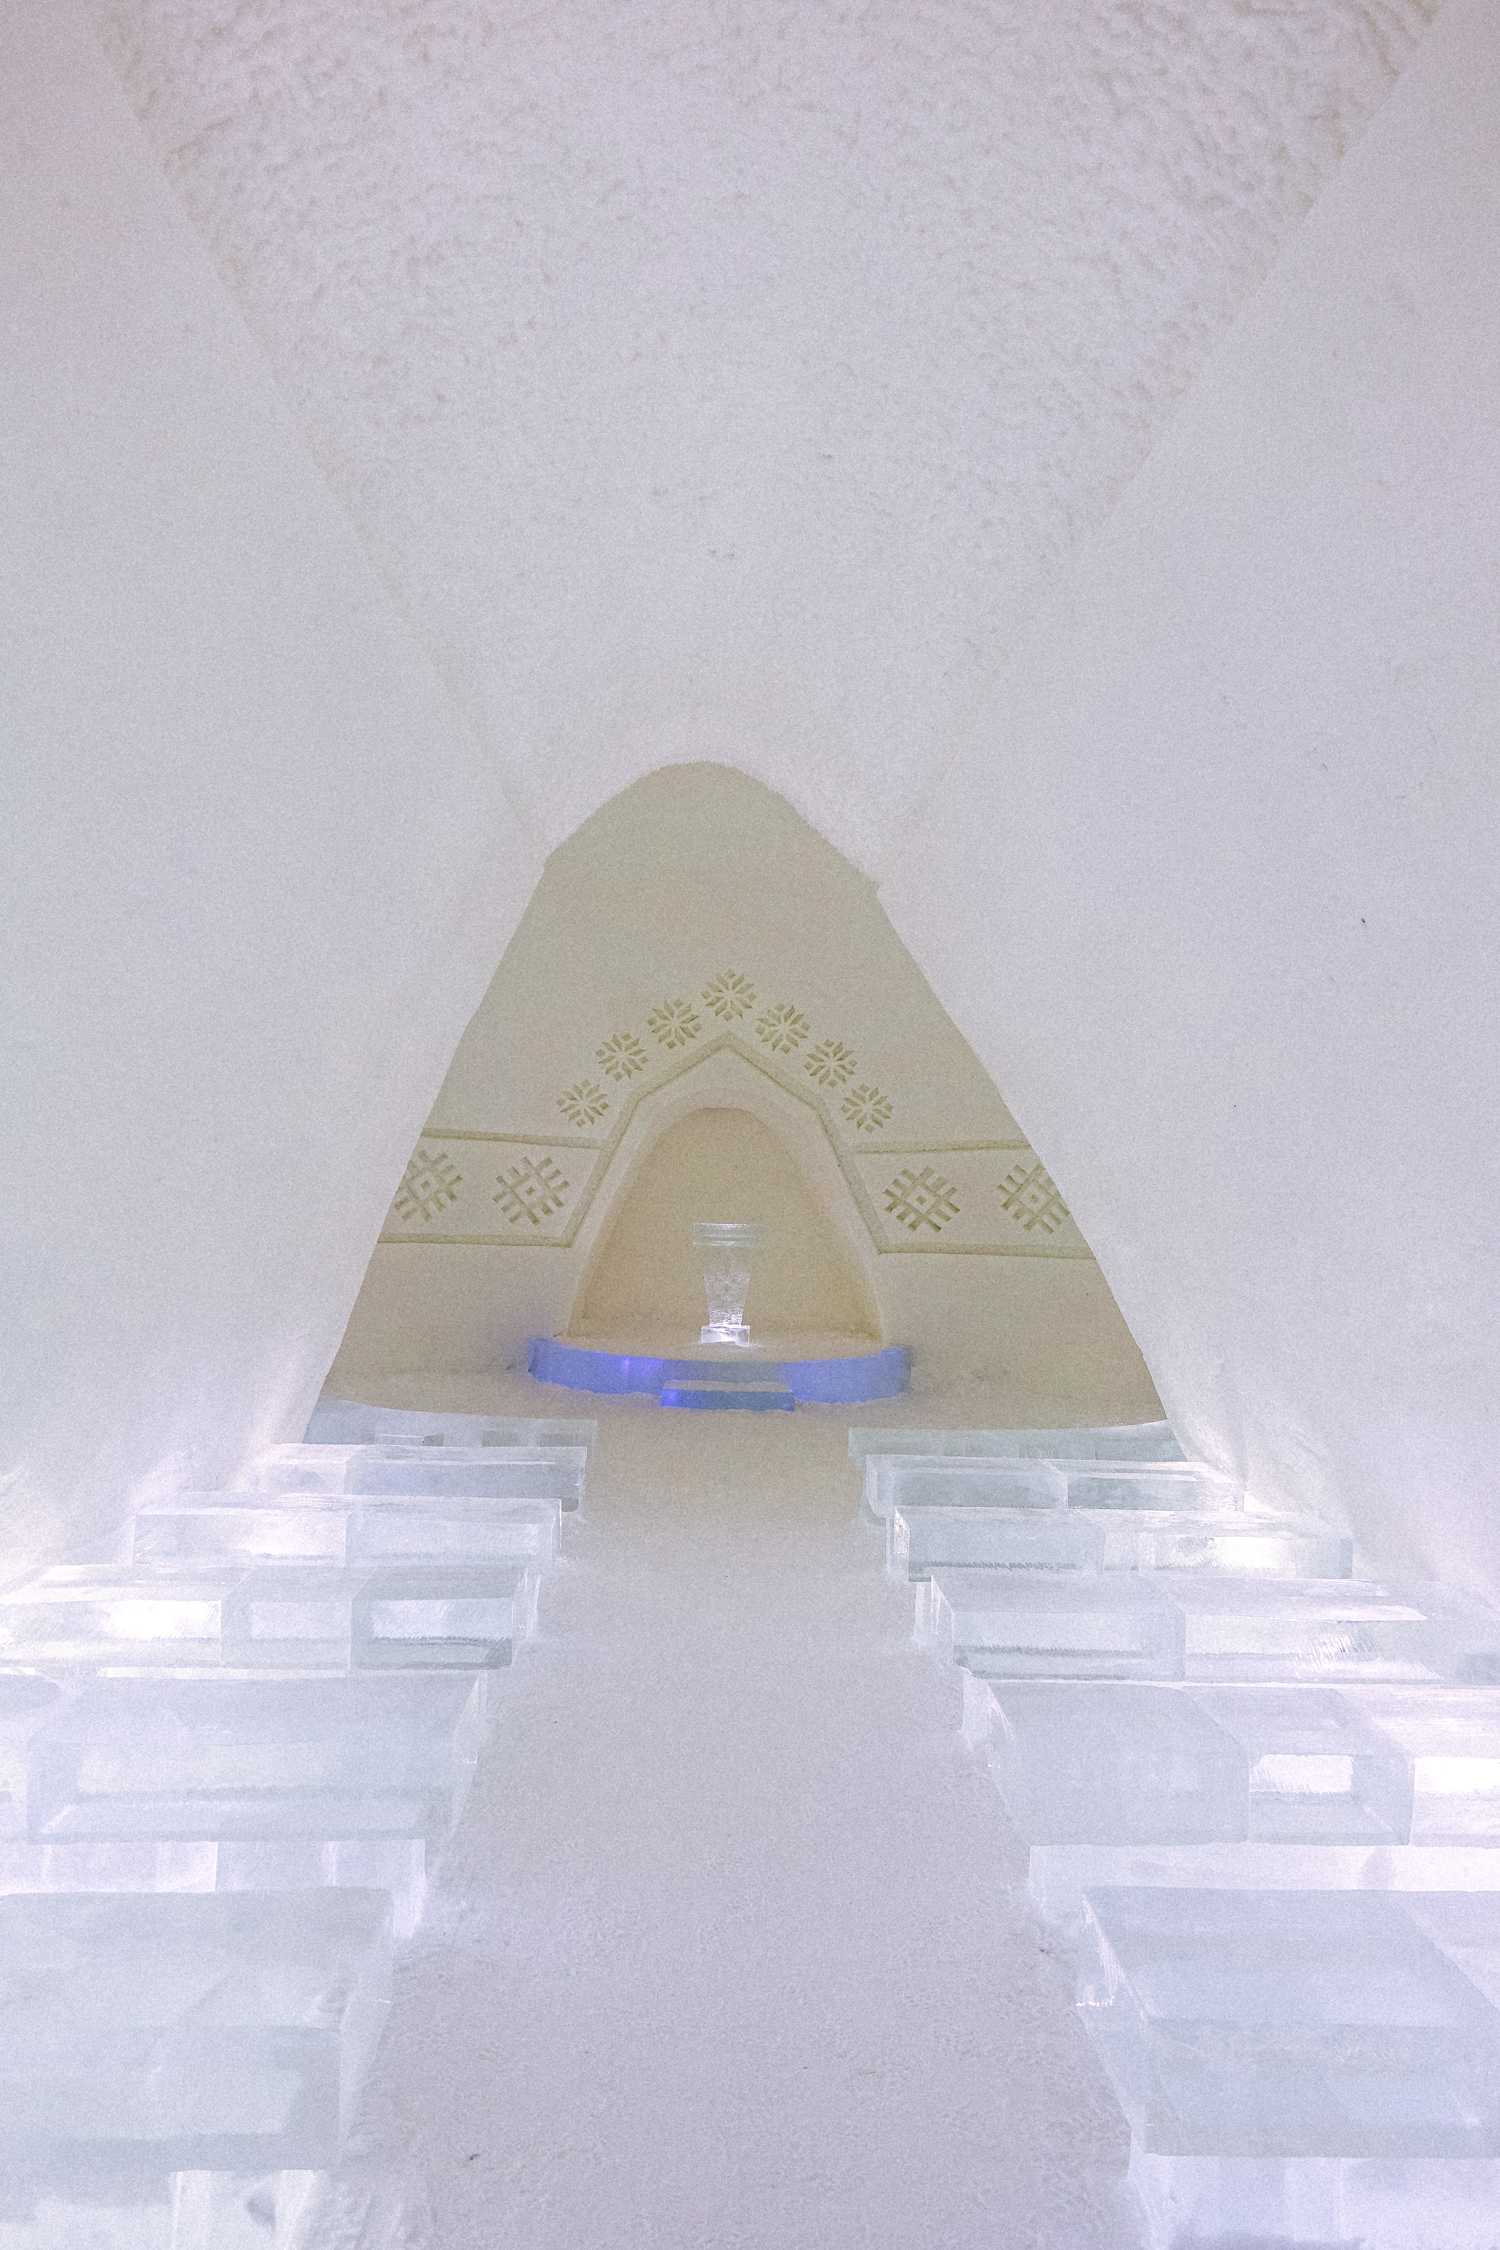 Alyssa Campanella of The A List blog visits the Game of Thrones ice hotel in Finland